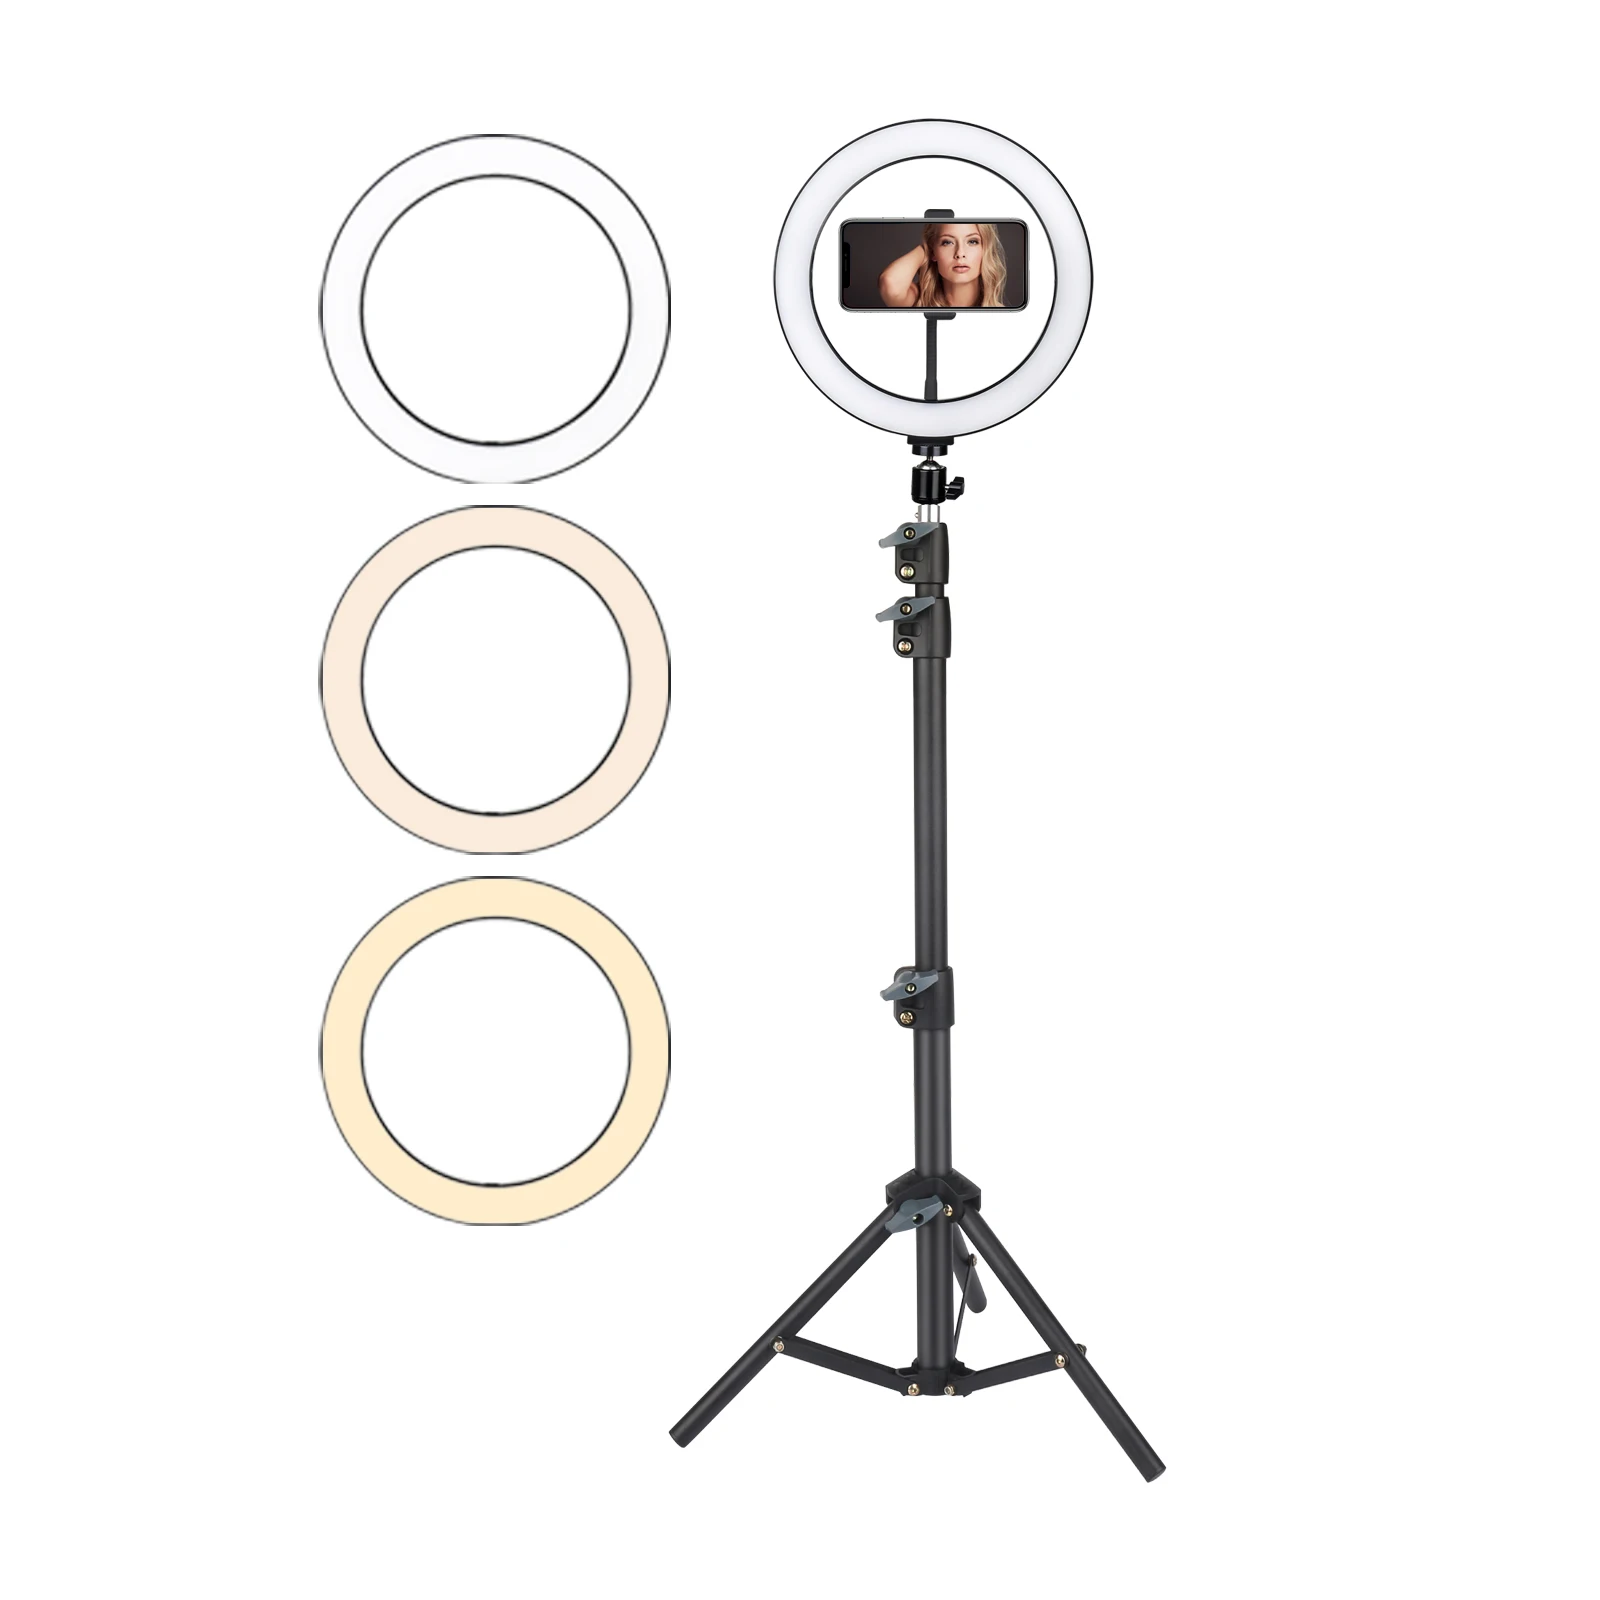 

Professional live show tik tok broadcast ring fill light lamp 10inch photo studio selfie led ring light with tripod stand, Balck